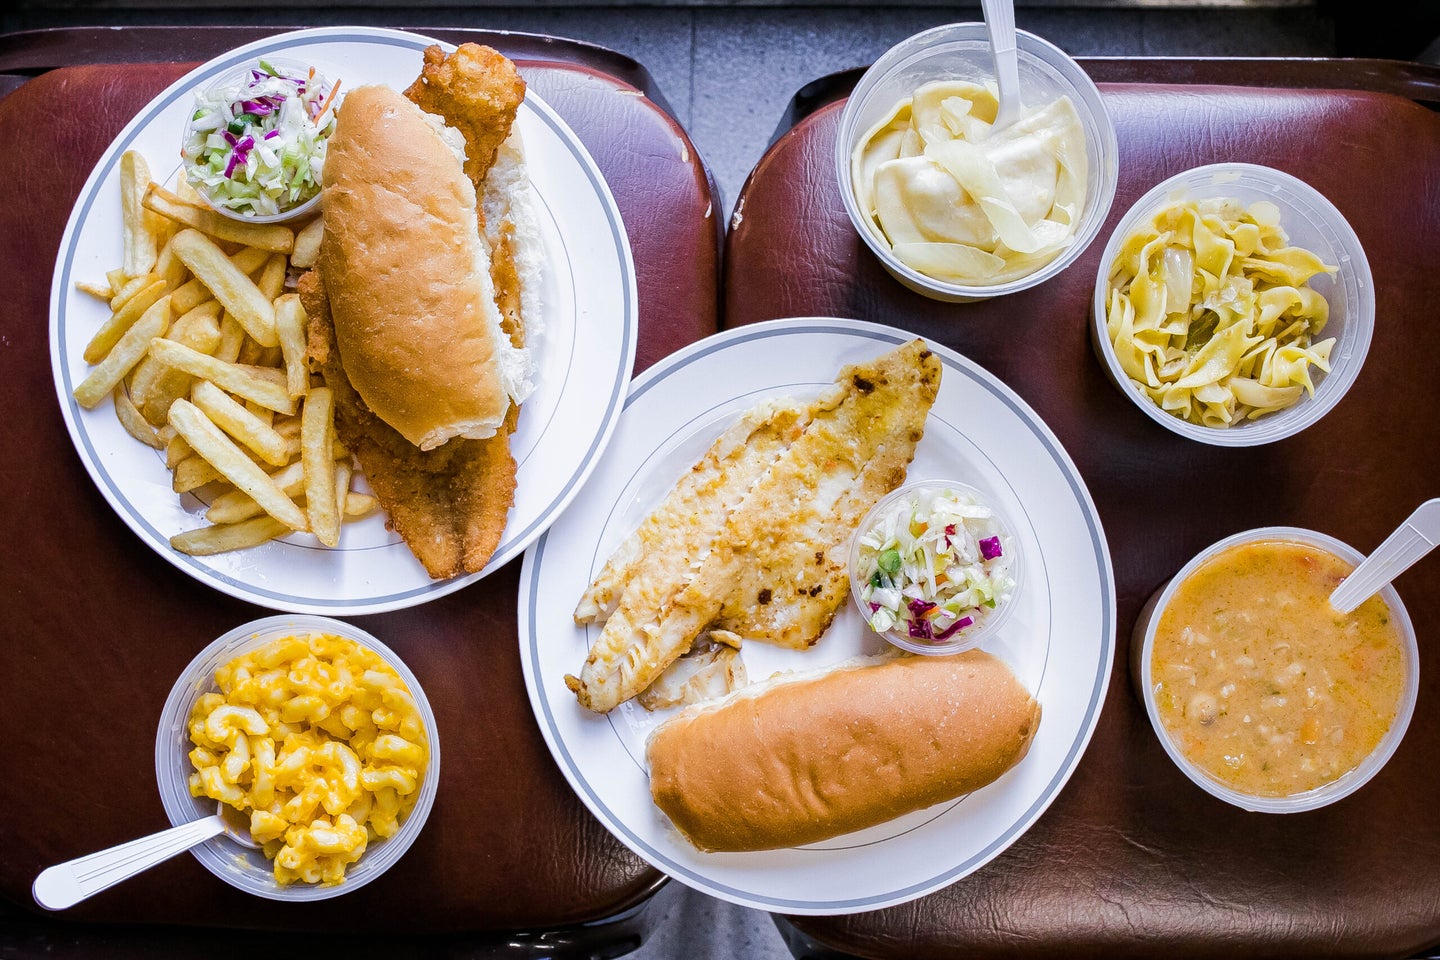 fried fish sandwich and sides